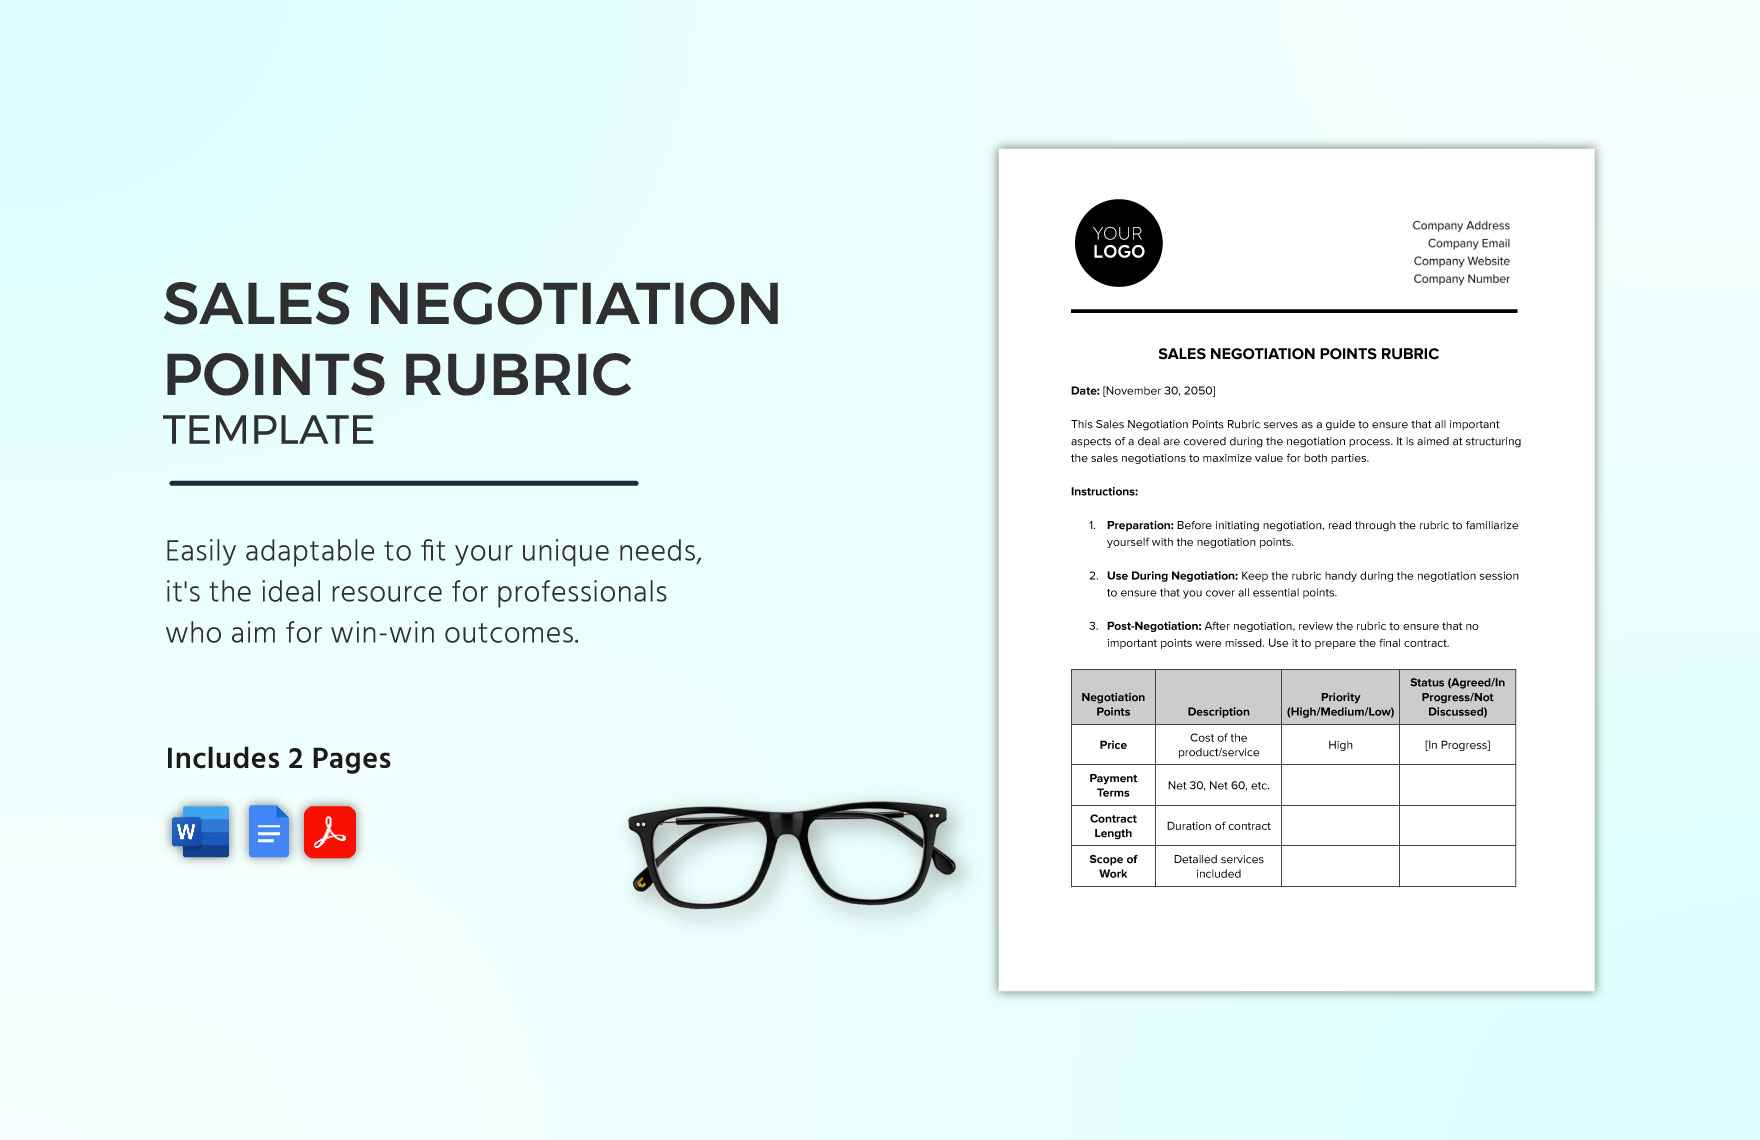 Sales Negotiation Points Rubric Template